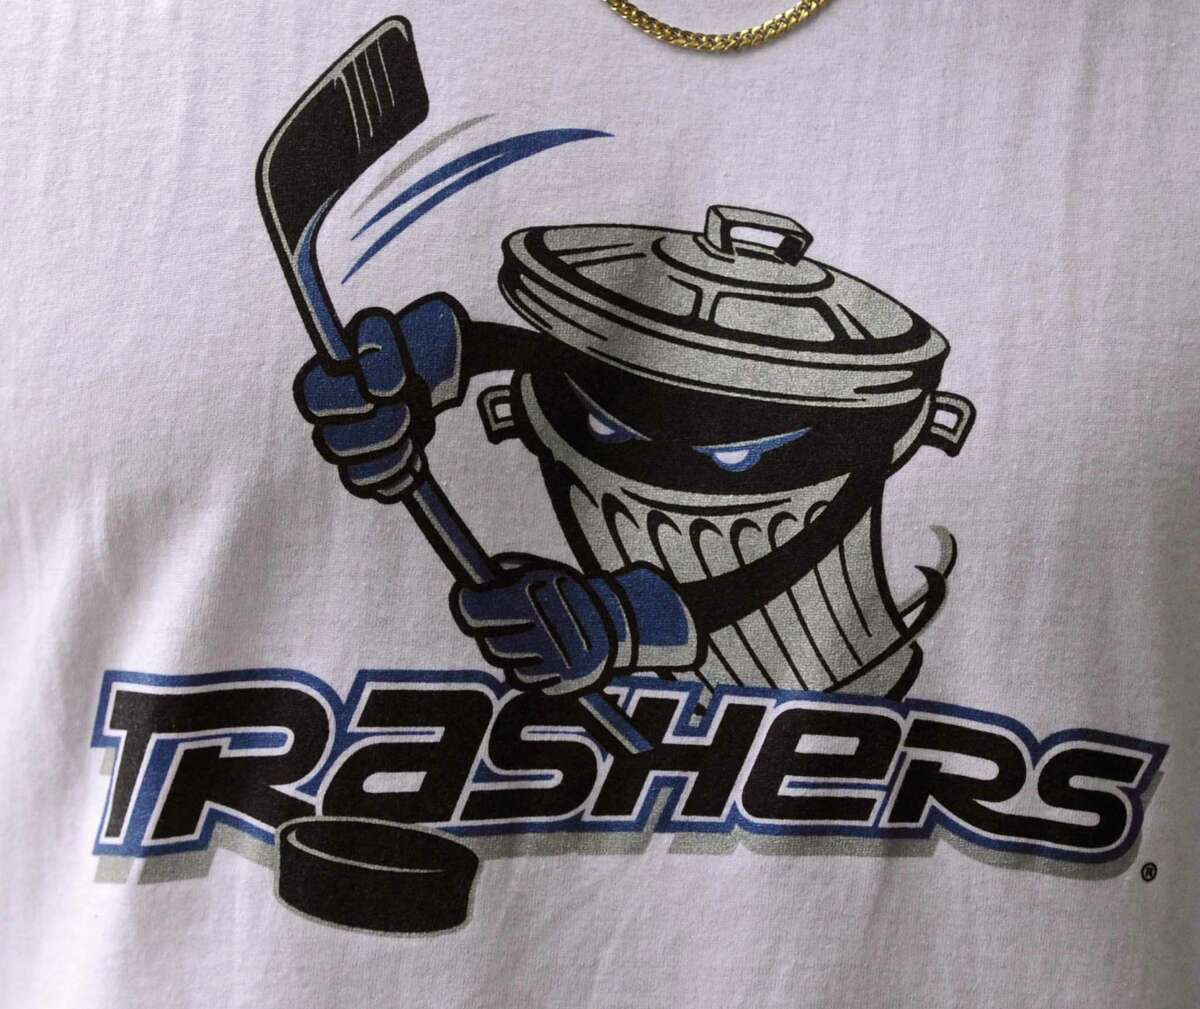 On Danbury Trashers Revival, Jimmy Galante: You Never Know